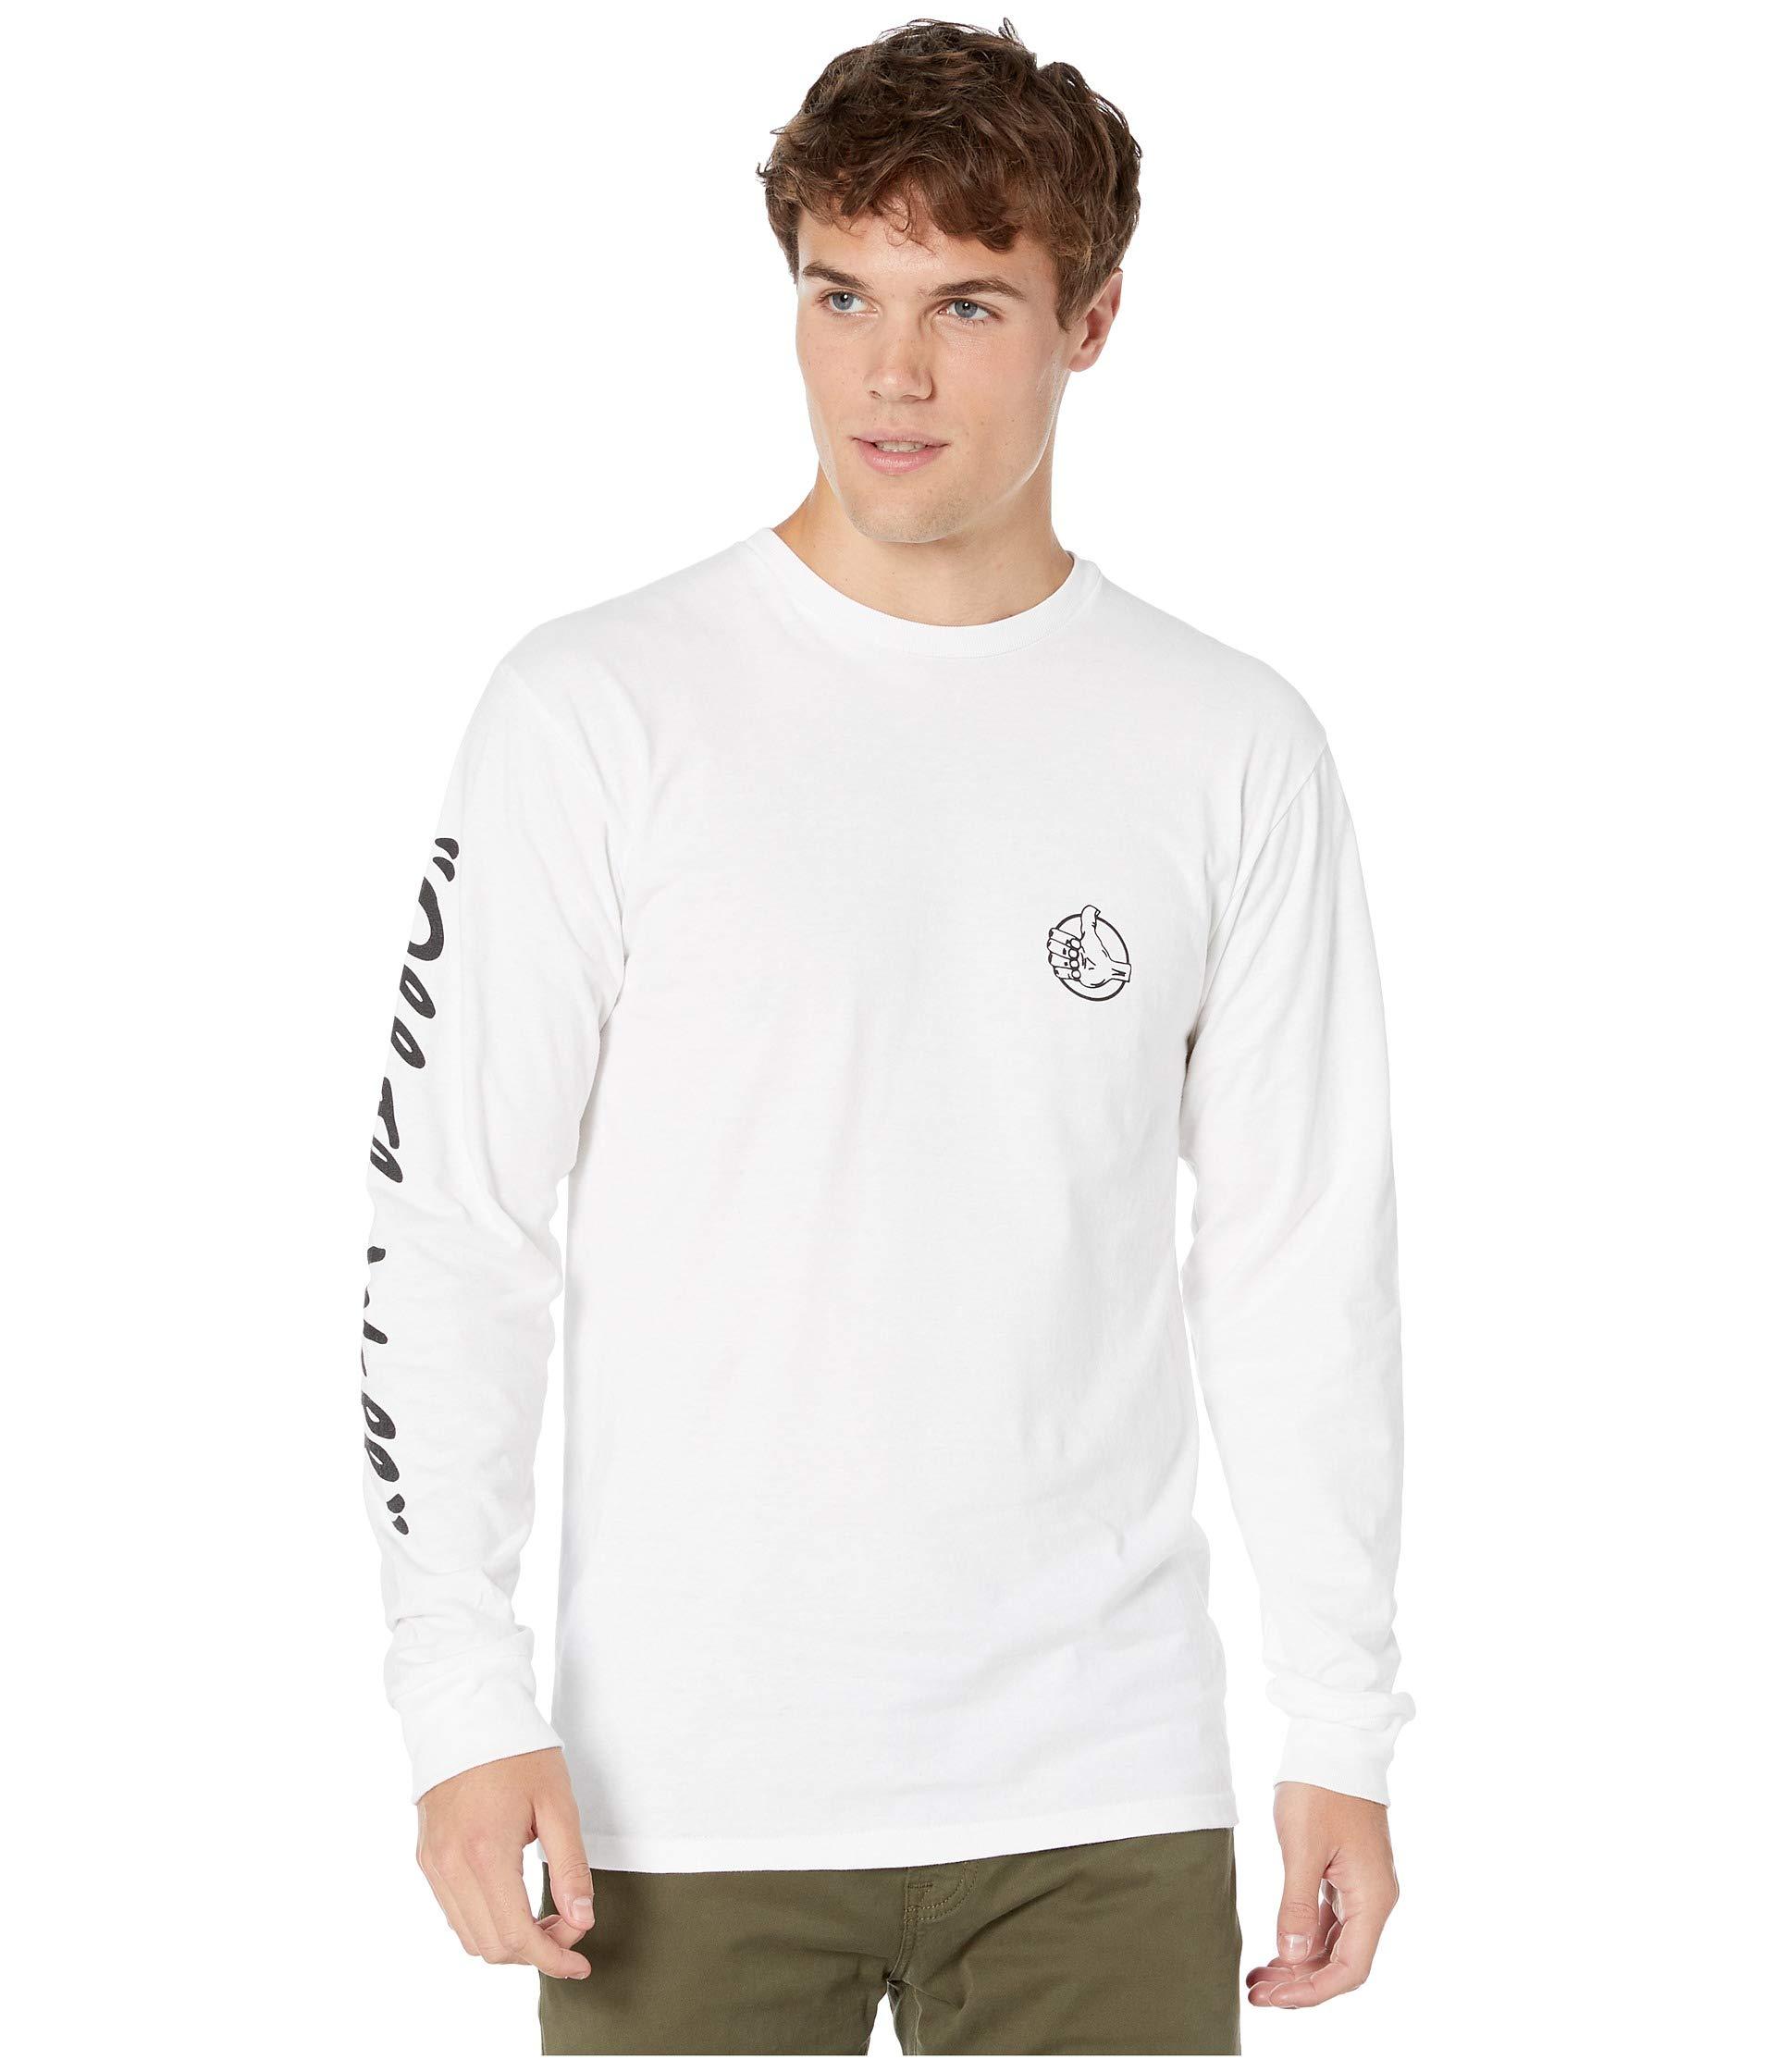 Vans Cotton Bmx Off The Wall Long Sleeve T-shirt in White for Men - Lyst